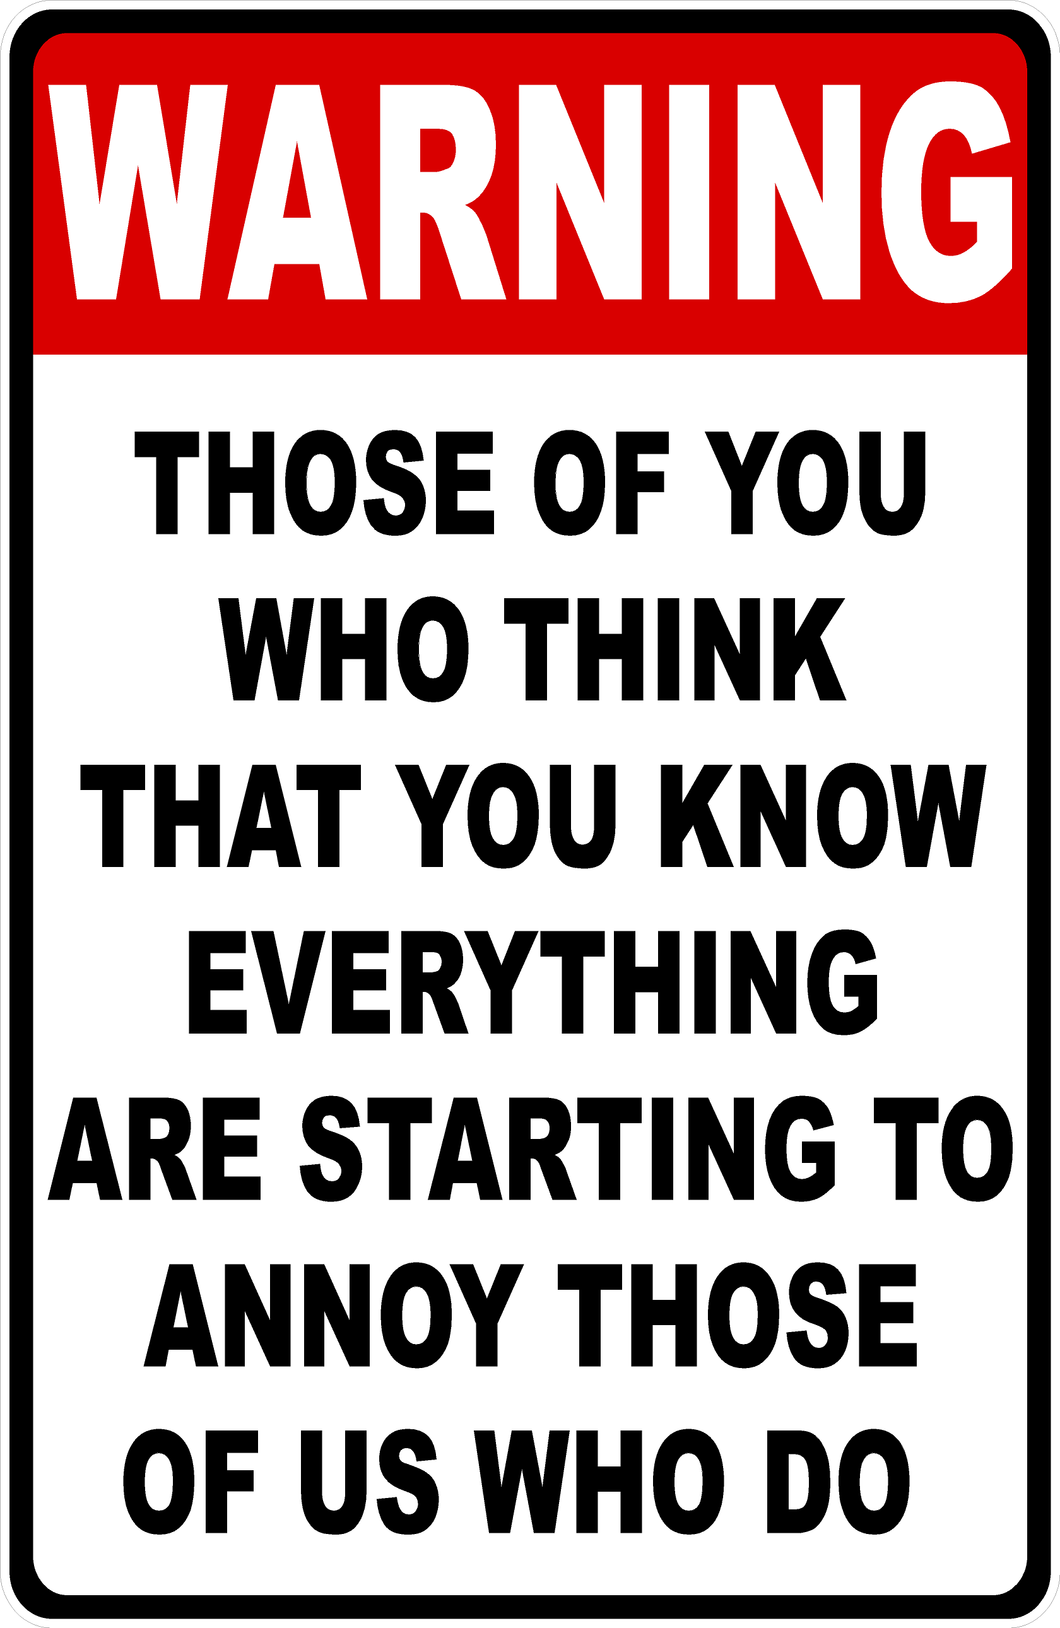 Warning Those Of You Who Think You Know Everything Are Starting To Annoy Those Of Us Who Do Sign